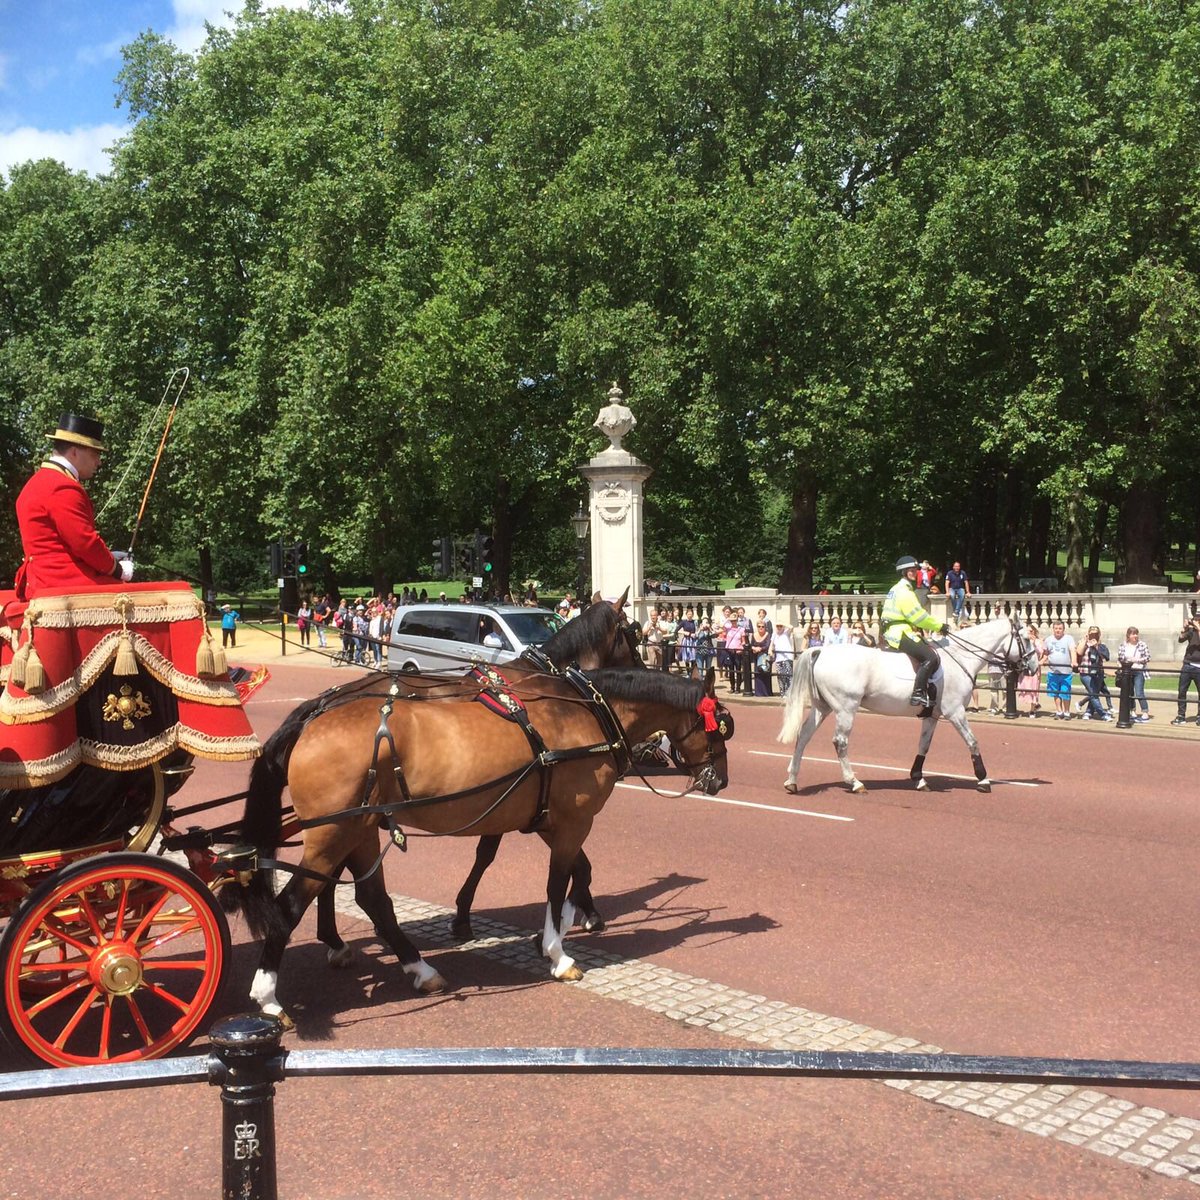 ☀️☀️☀️ for #MountedBranch supporting #LettersOfCredence at #BuckinghamPalace today 🐎🐎